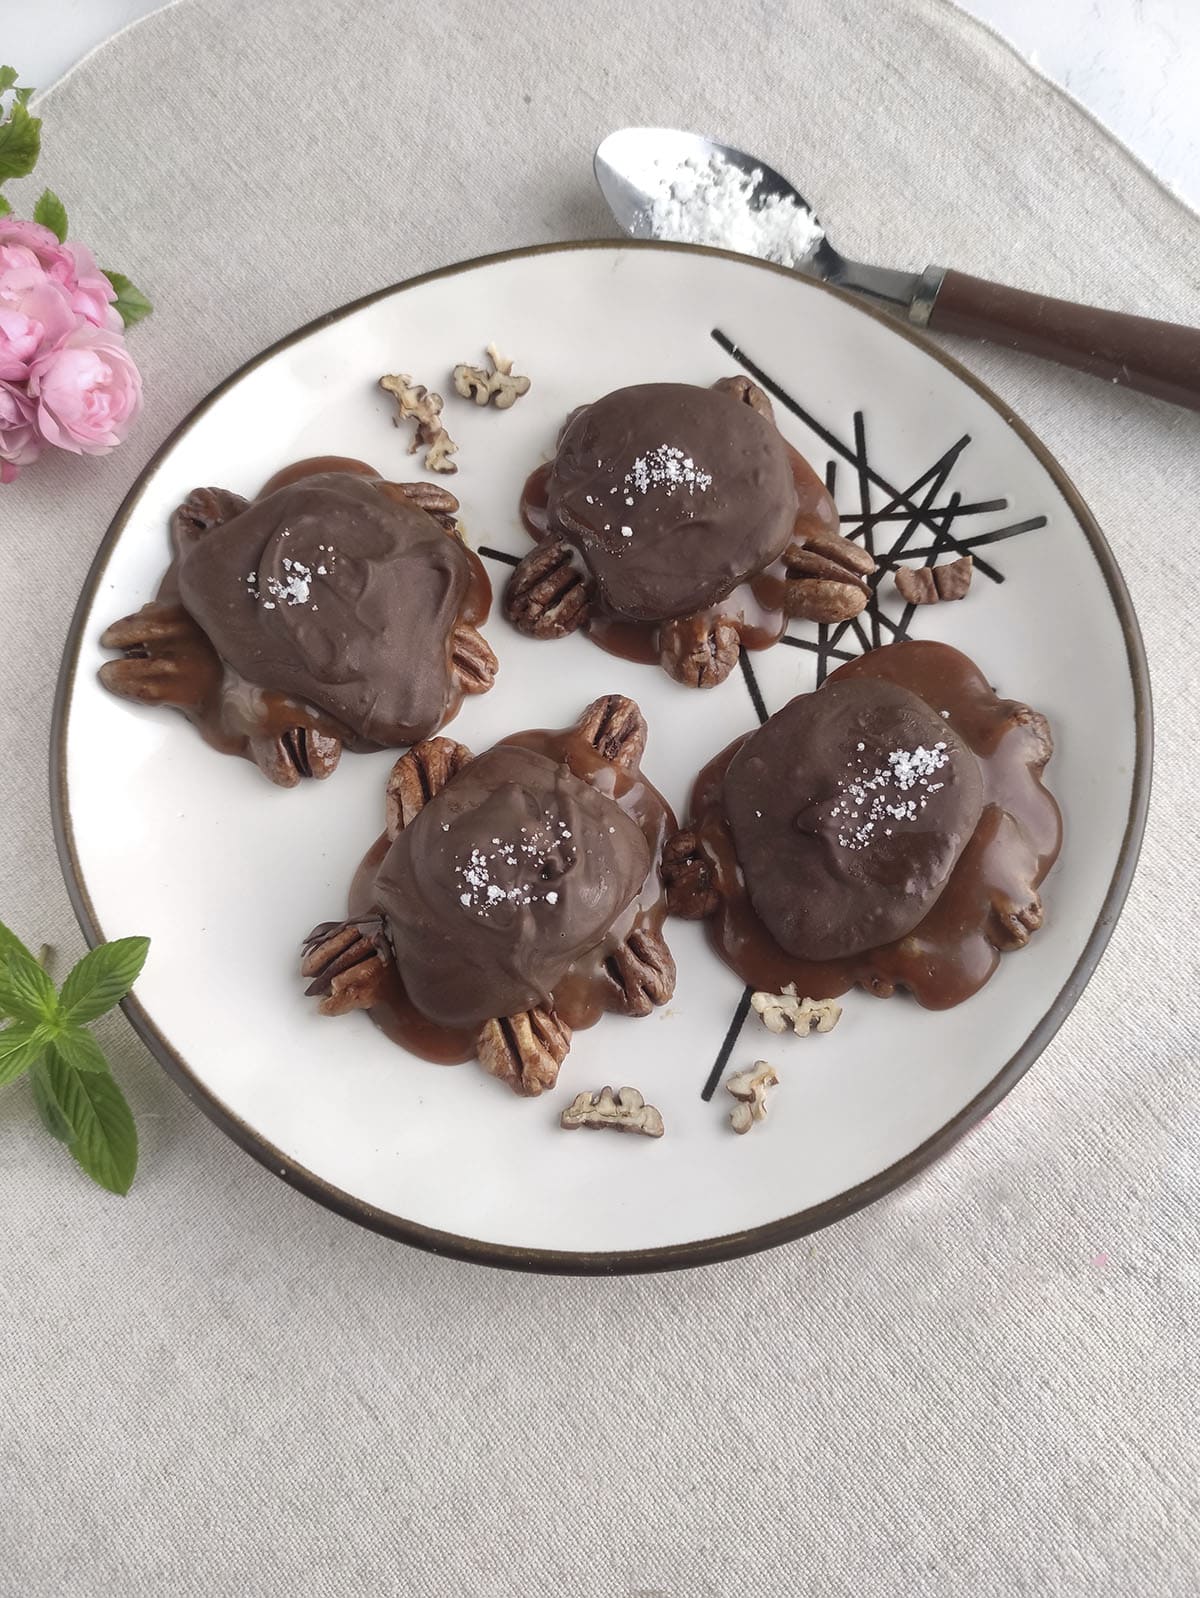 4 chocolate pecan turtles on a plate with a small spoon filled with salt on the upper right.